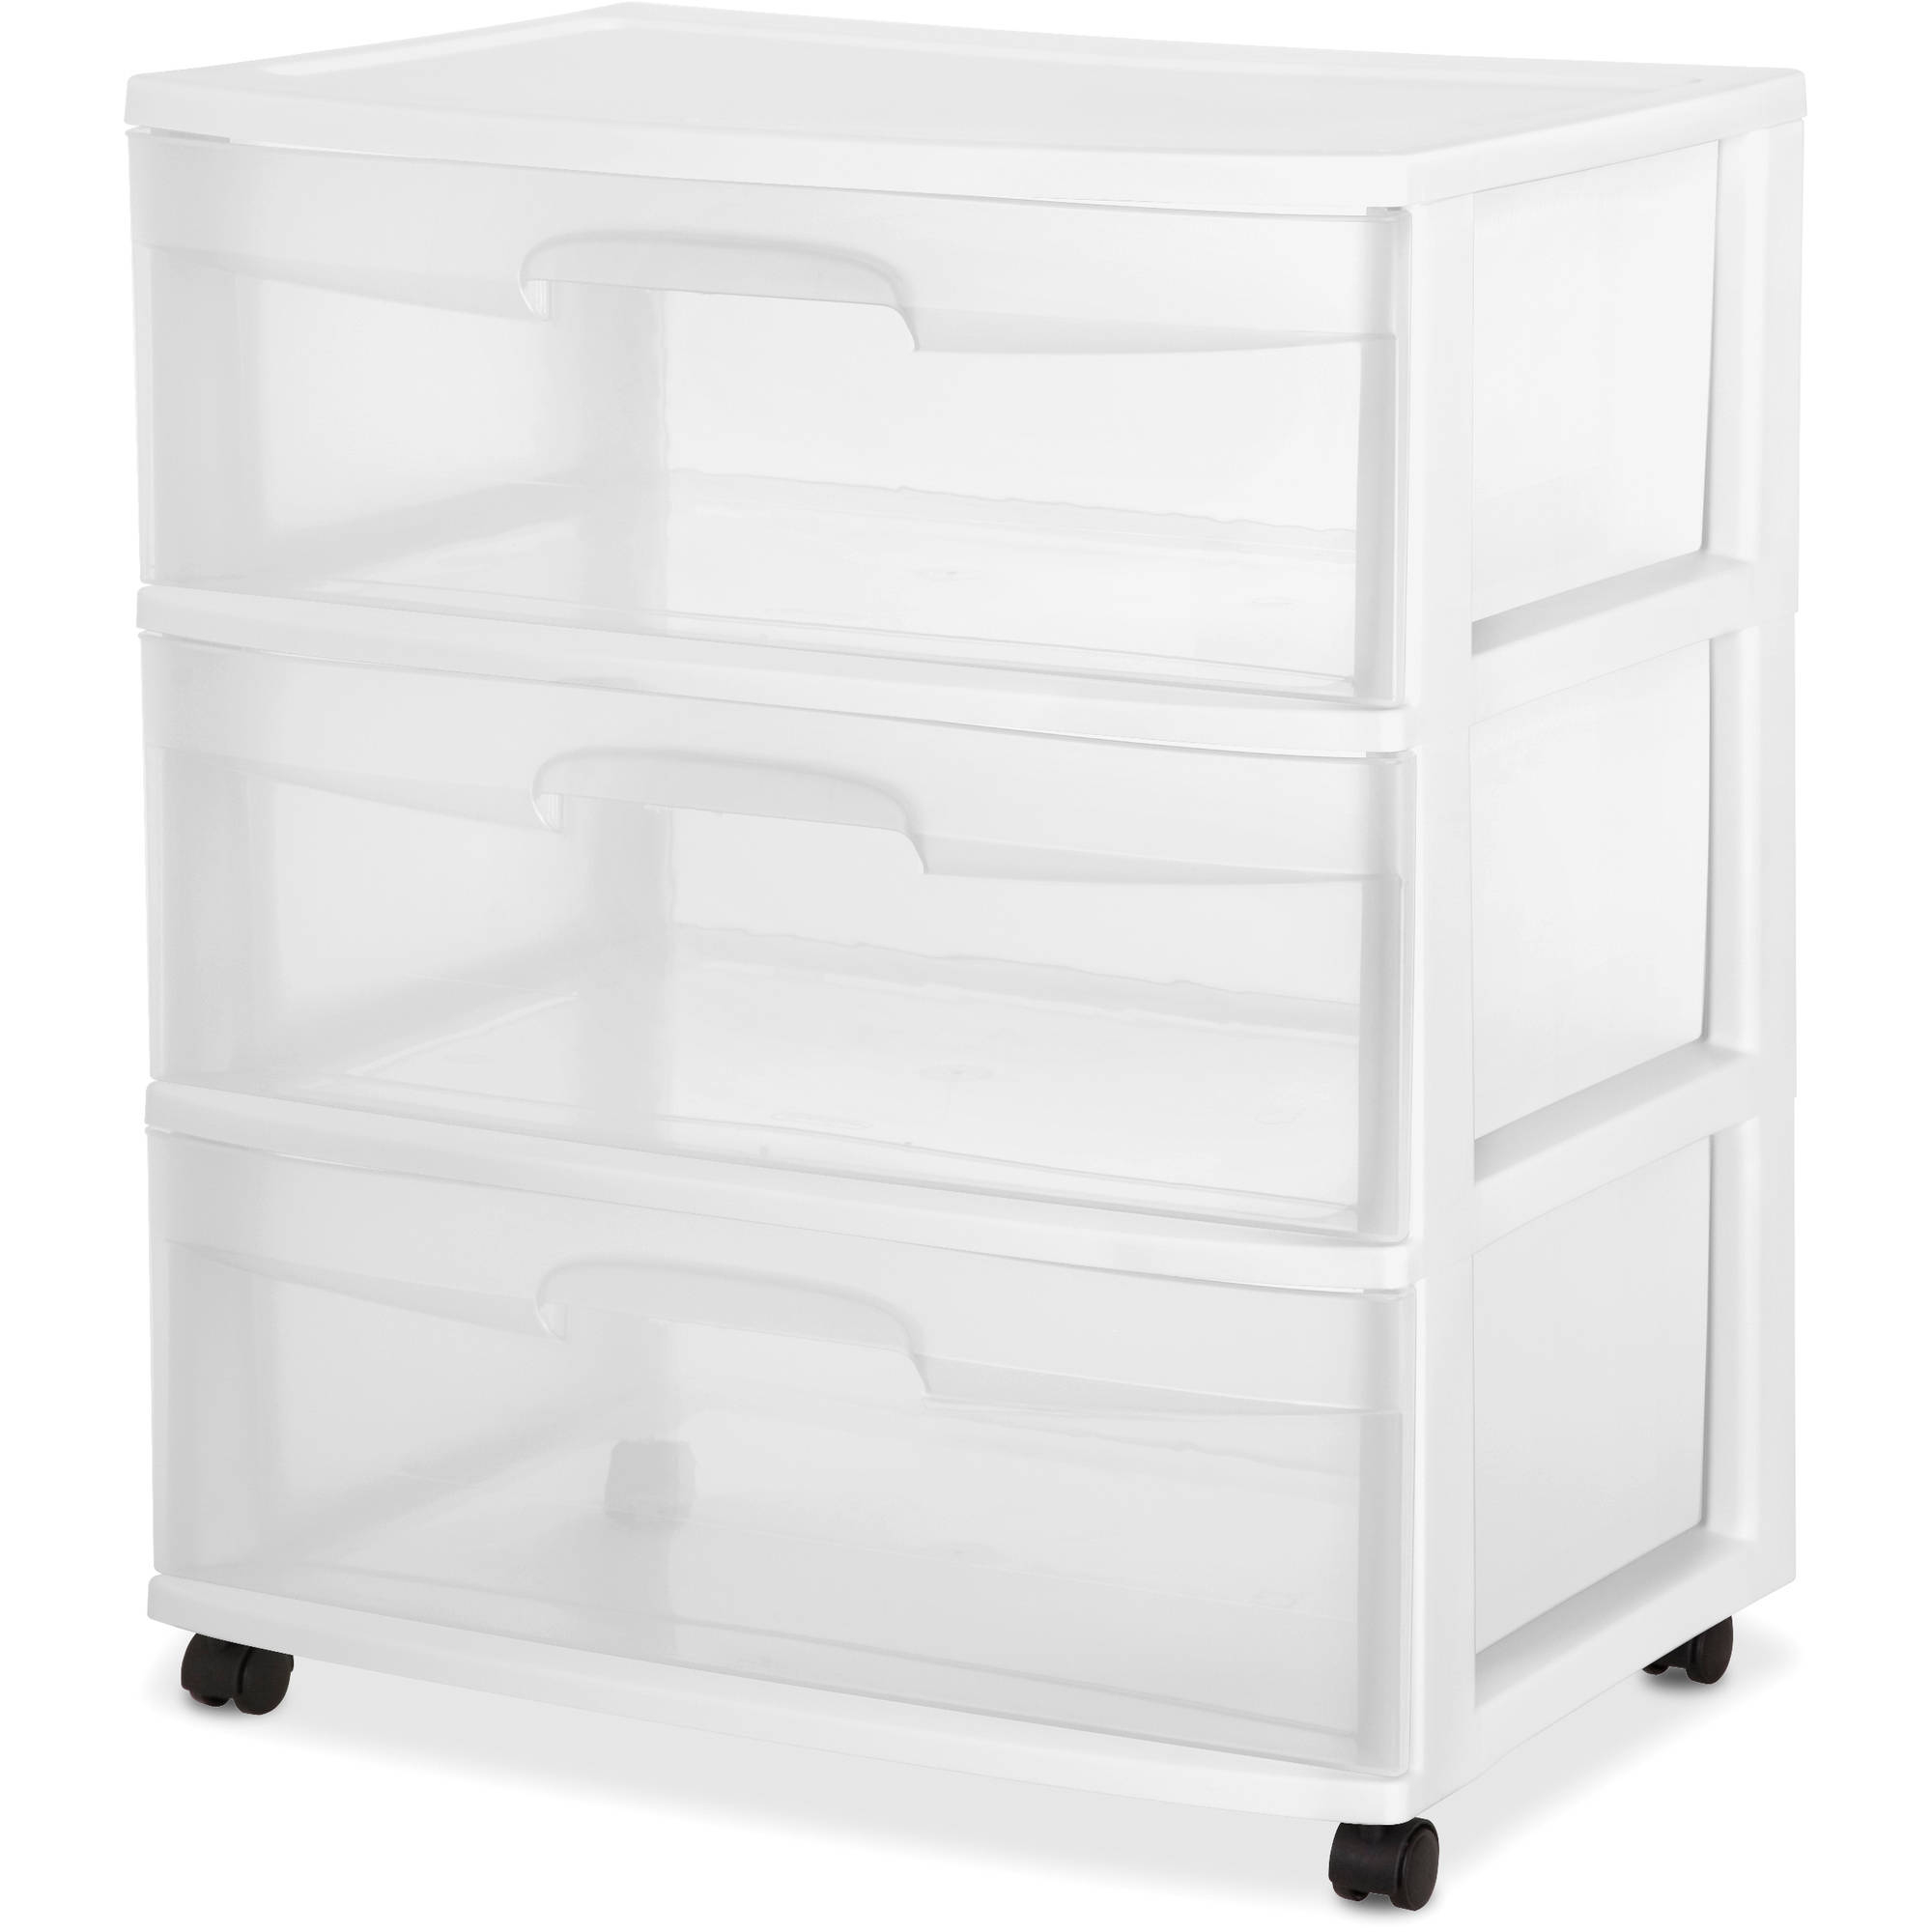 Sterilite 3 Drawer Wide Weave Tower White Walmart within proportions 2000 X 2000